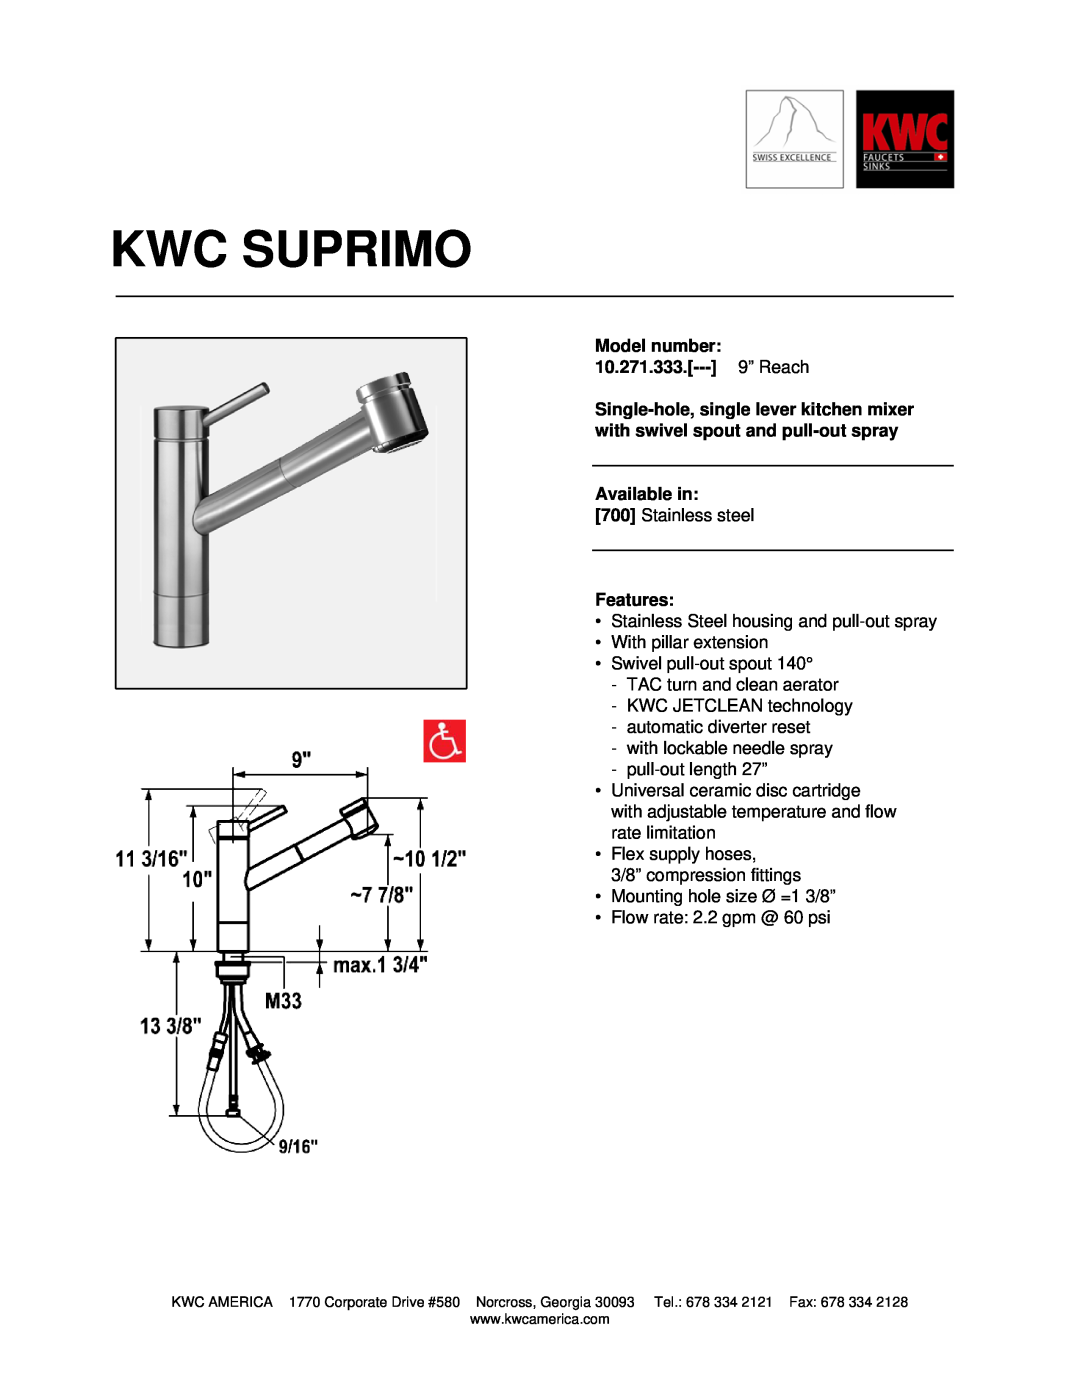 KWC manual Kwc Suprimo, Model number 10.271.333.--- 9” Reach, Available in, Features 